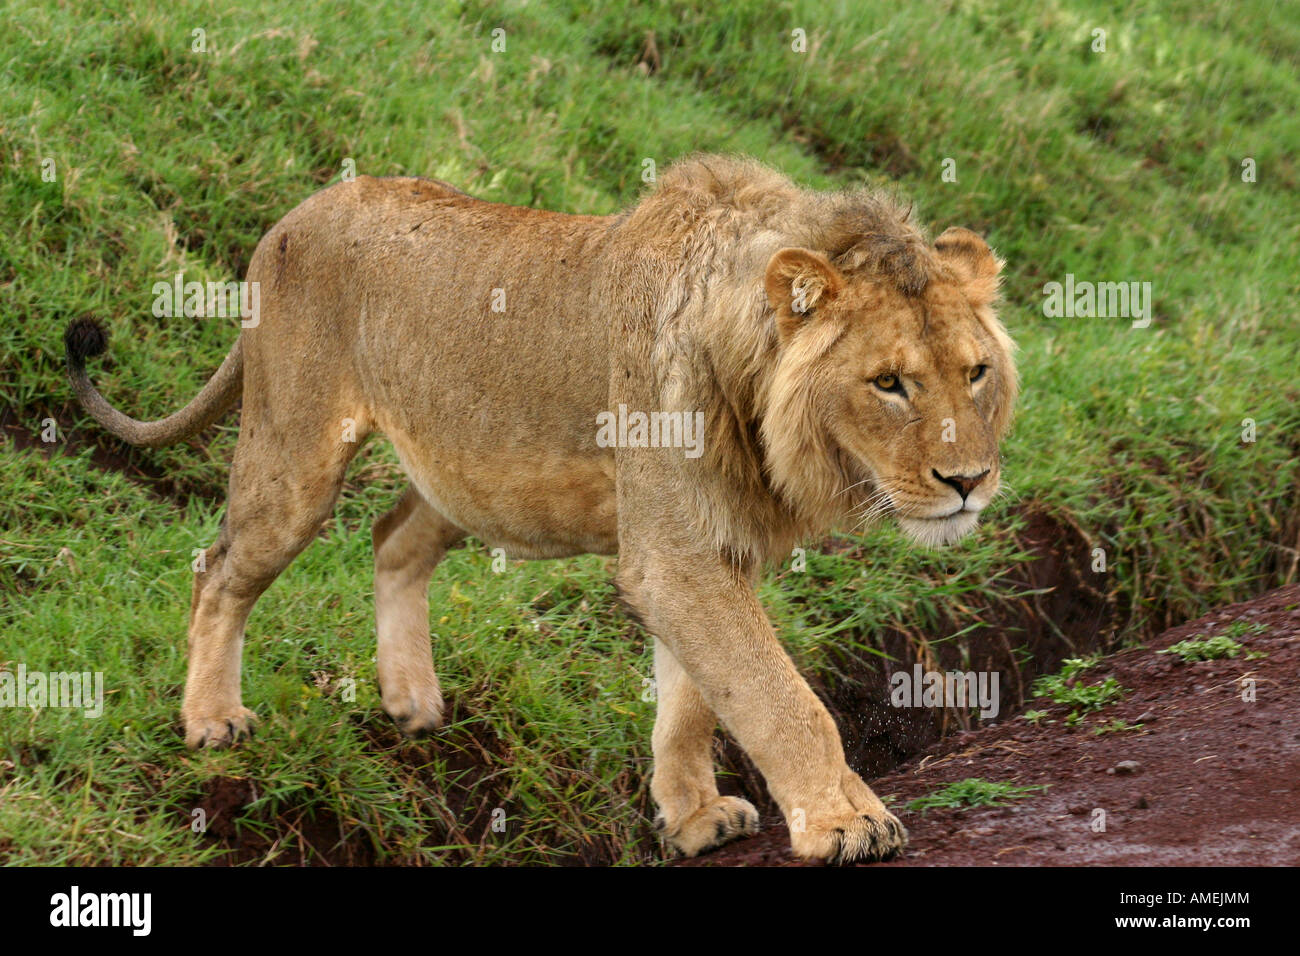 Adolescent male lion crossing the road in the Ngorongoro Crater on safari in Tanzania, East Africa. Stock Photo